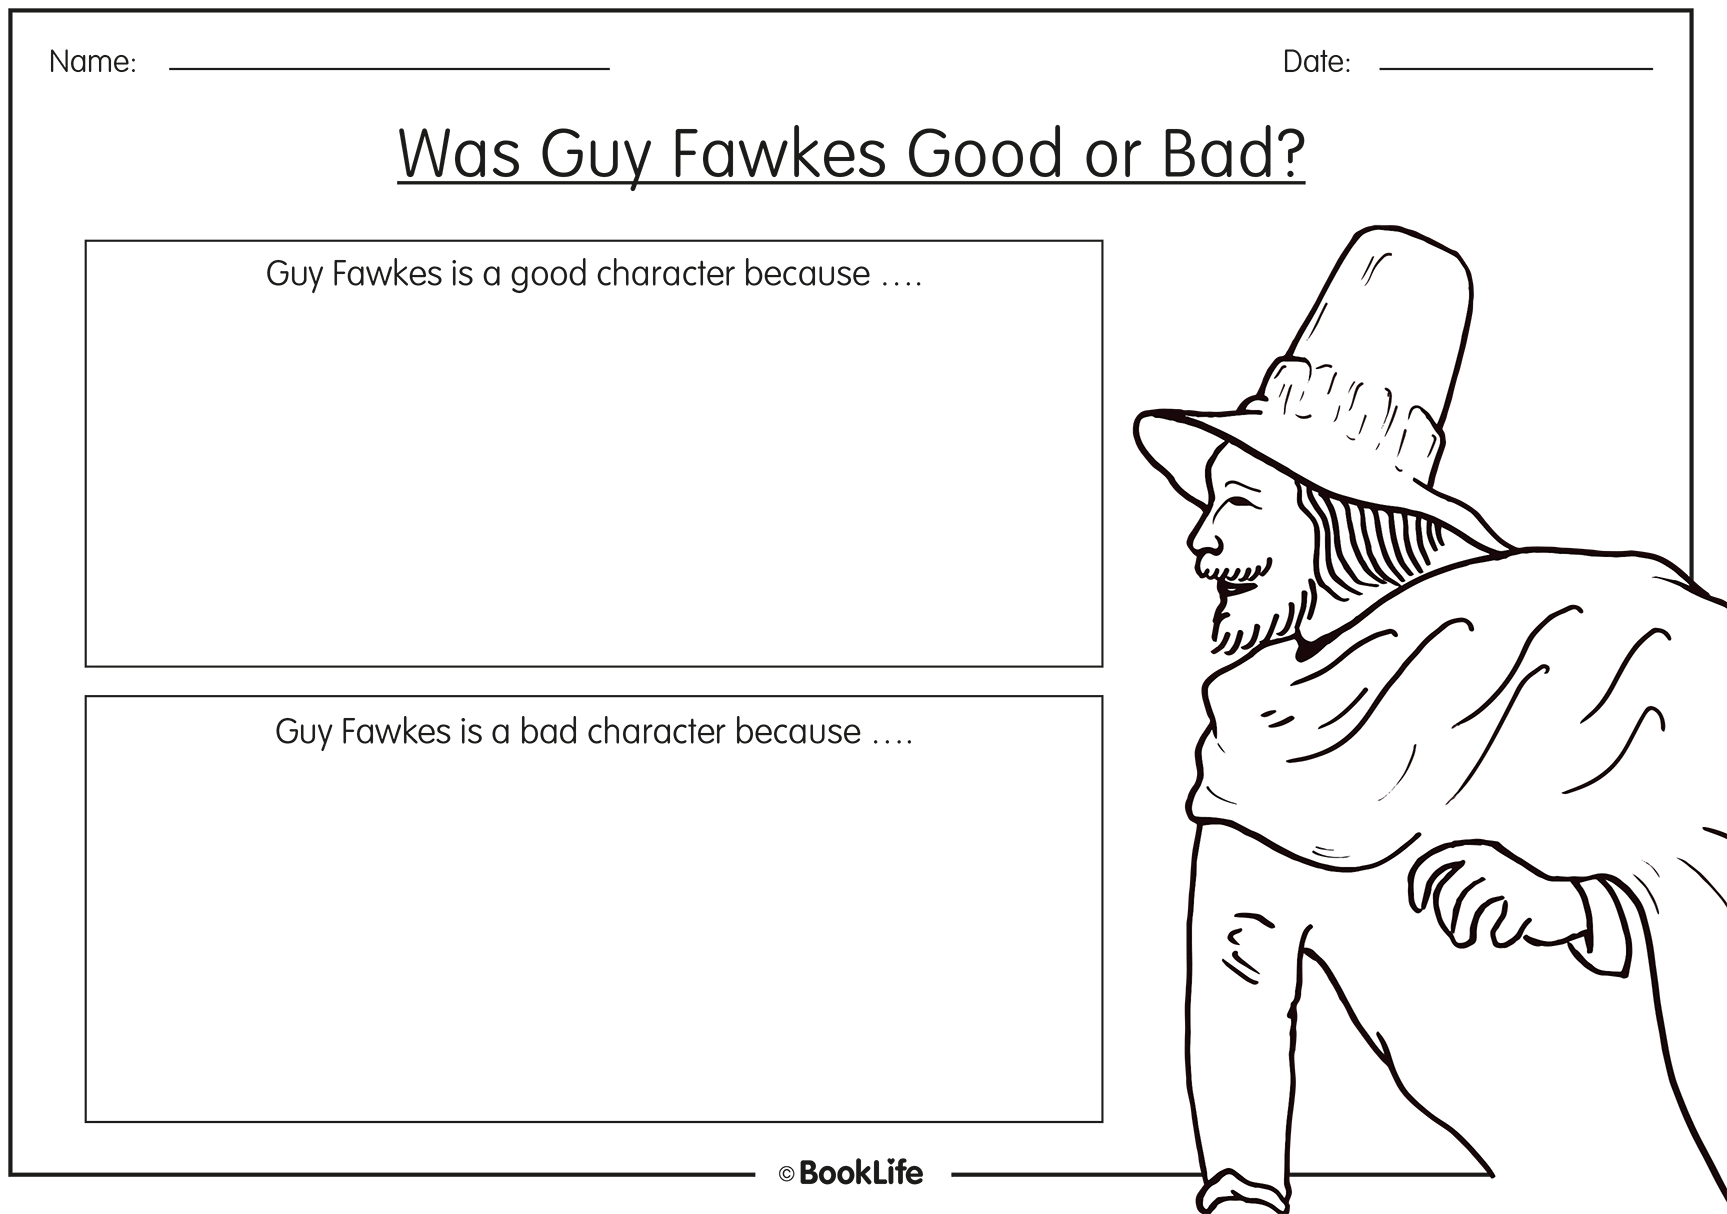 Was Guy Fawkes Good or Bad? by BookLife